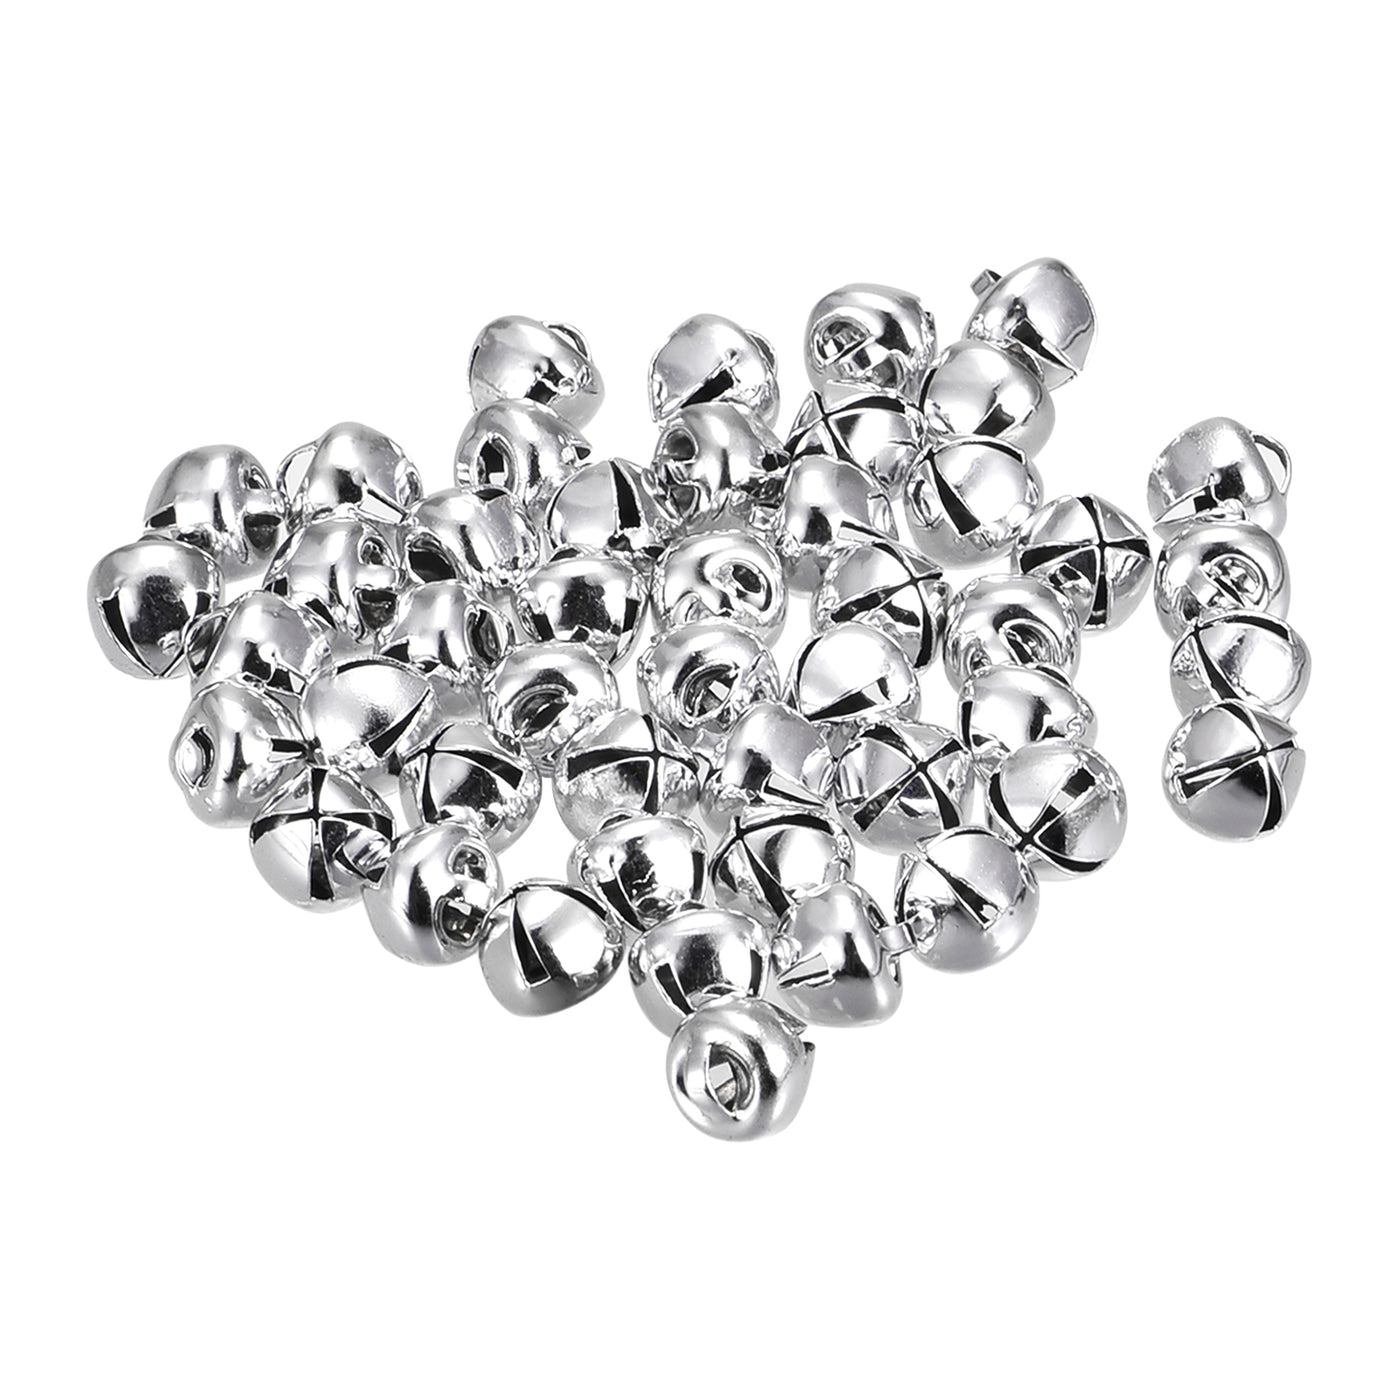 uxcell Uxcell Jingle Bells, 8mm 24pcs Small Bells for Crafts DIY Christmas, Silver Tone